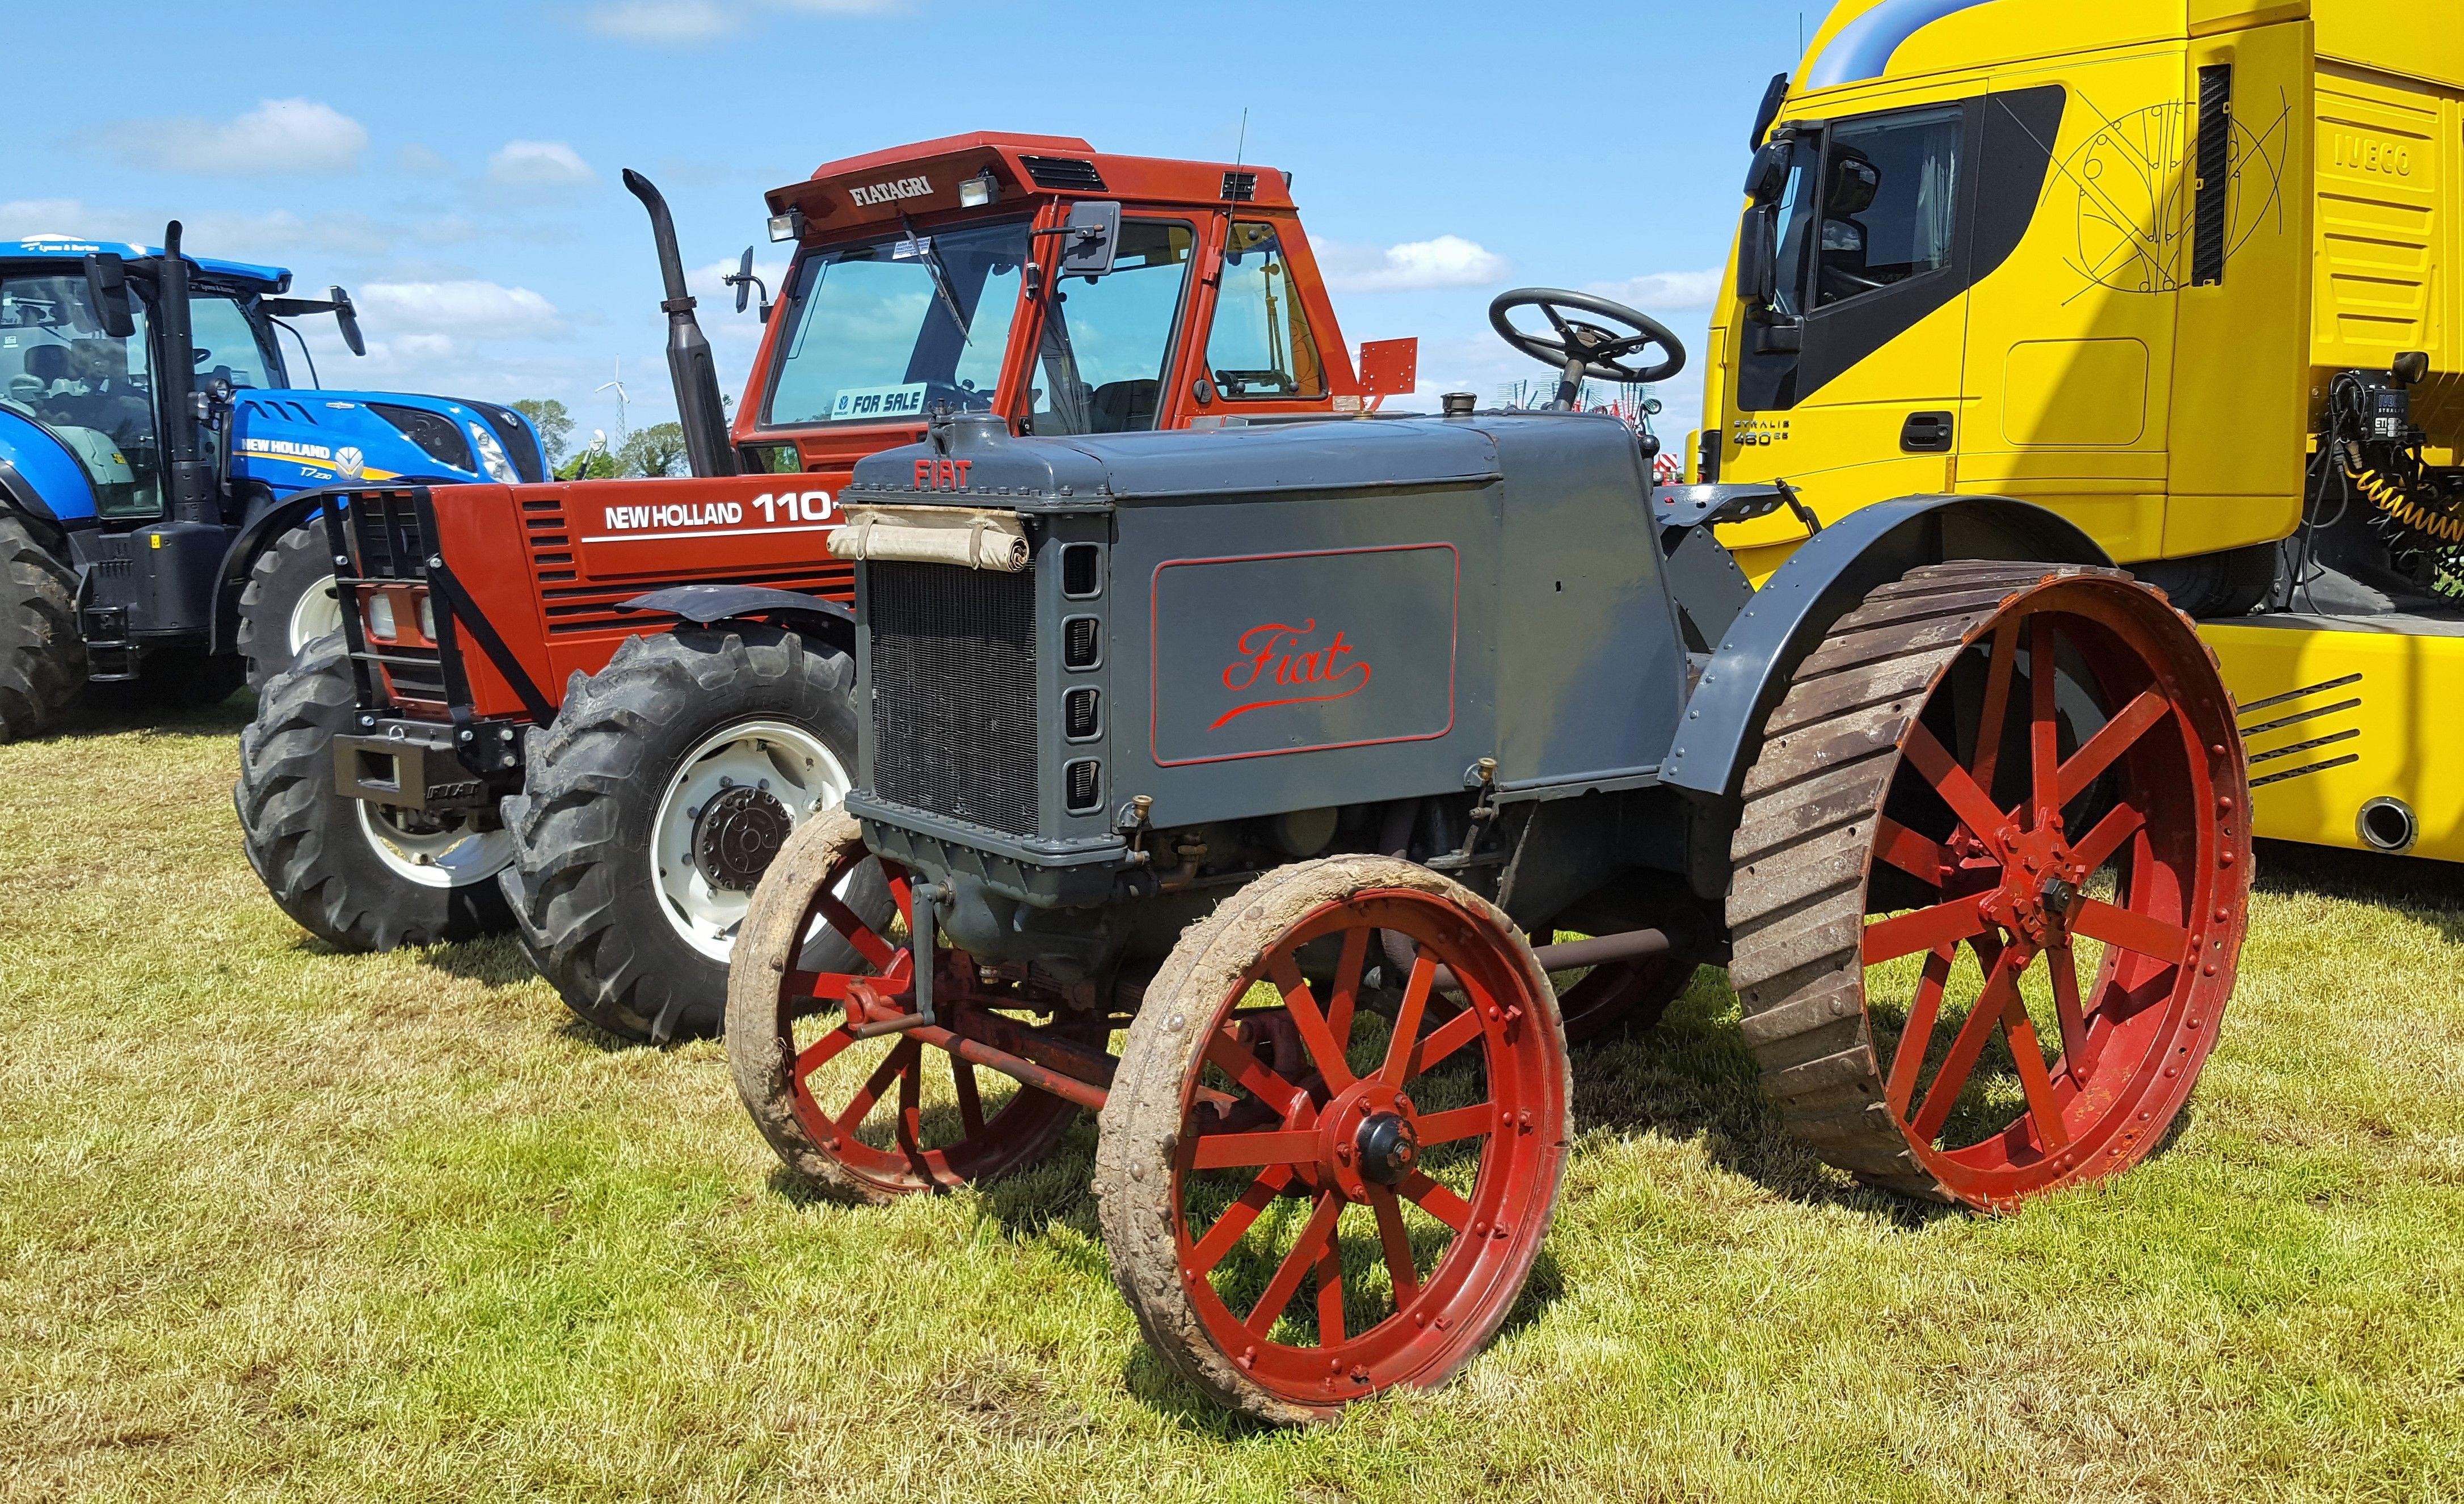 Old New Holland Logo - Old-school outfit gets an airing at Grass & Muck - Agriland.ie